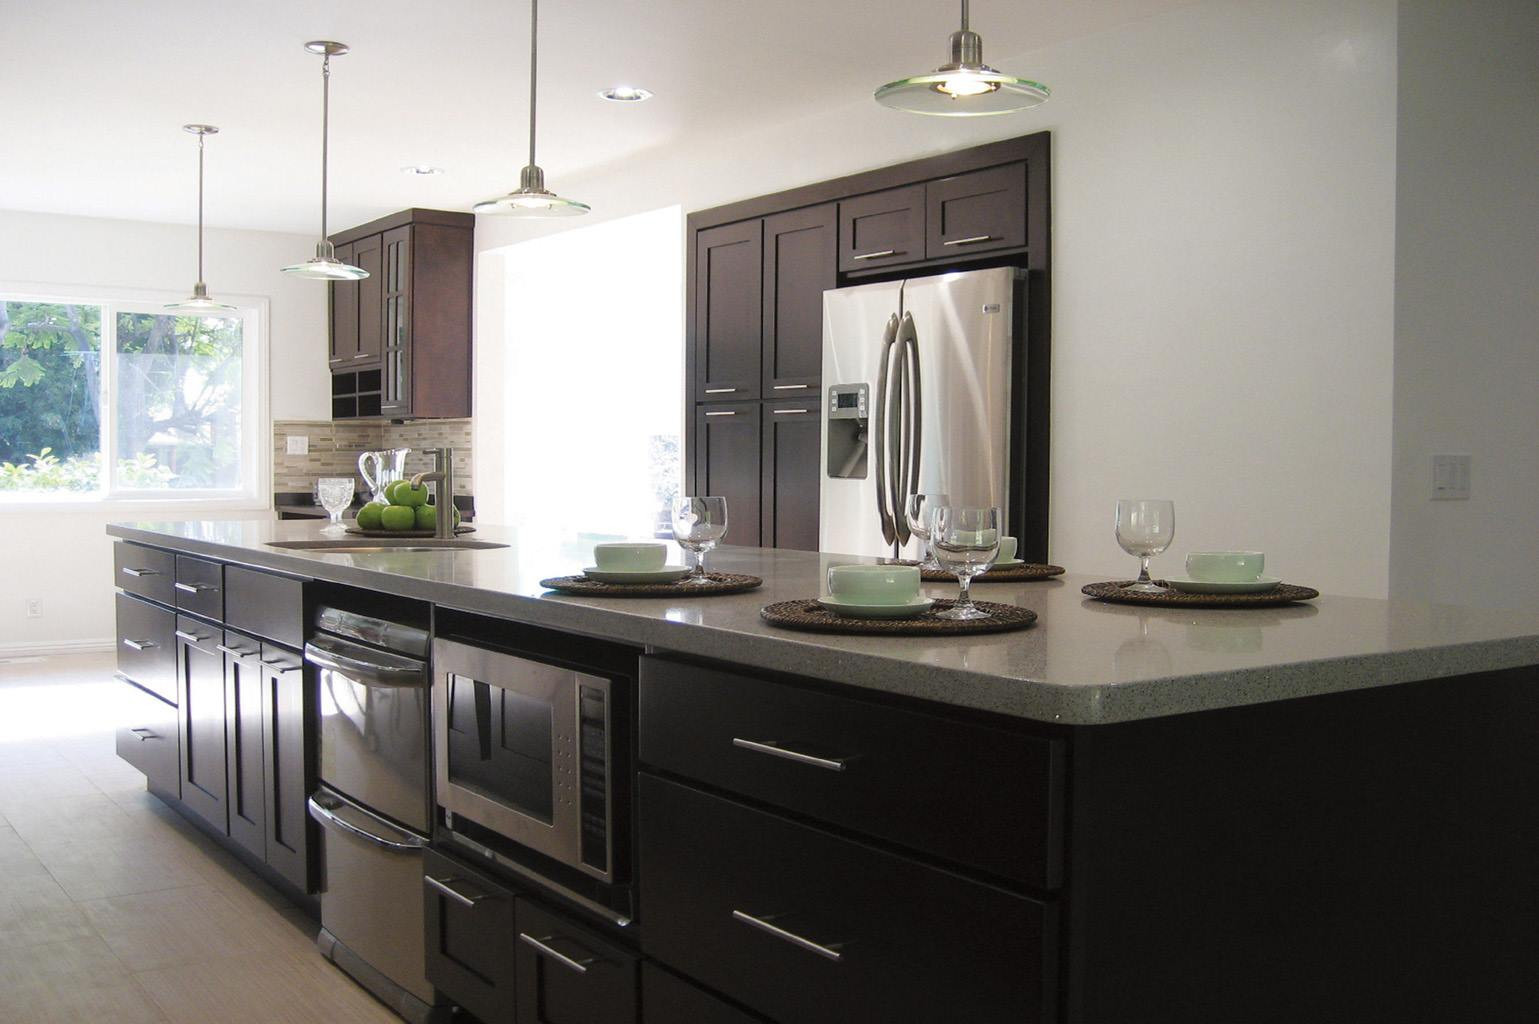 Espresso Kitchen Cabinets
 Talk to a Pro About Kitchen Cabinets & Remodeling Free